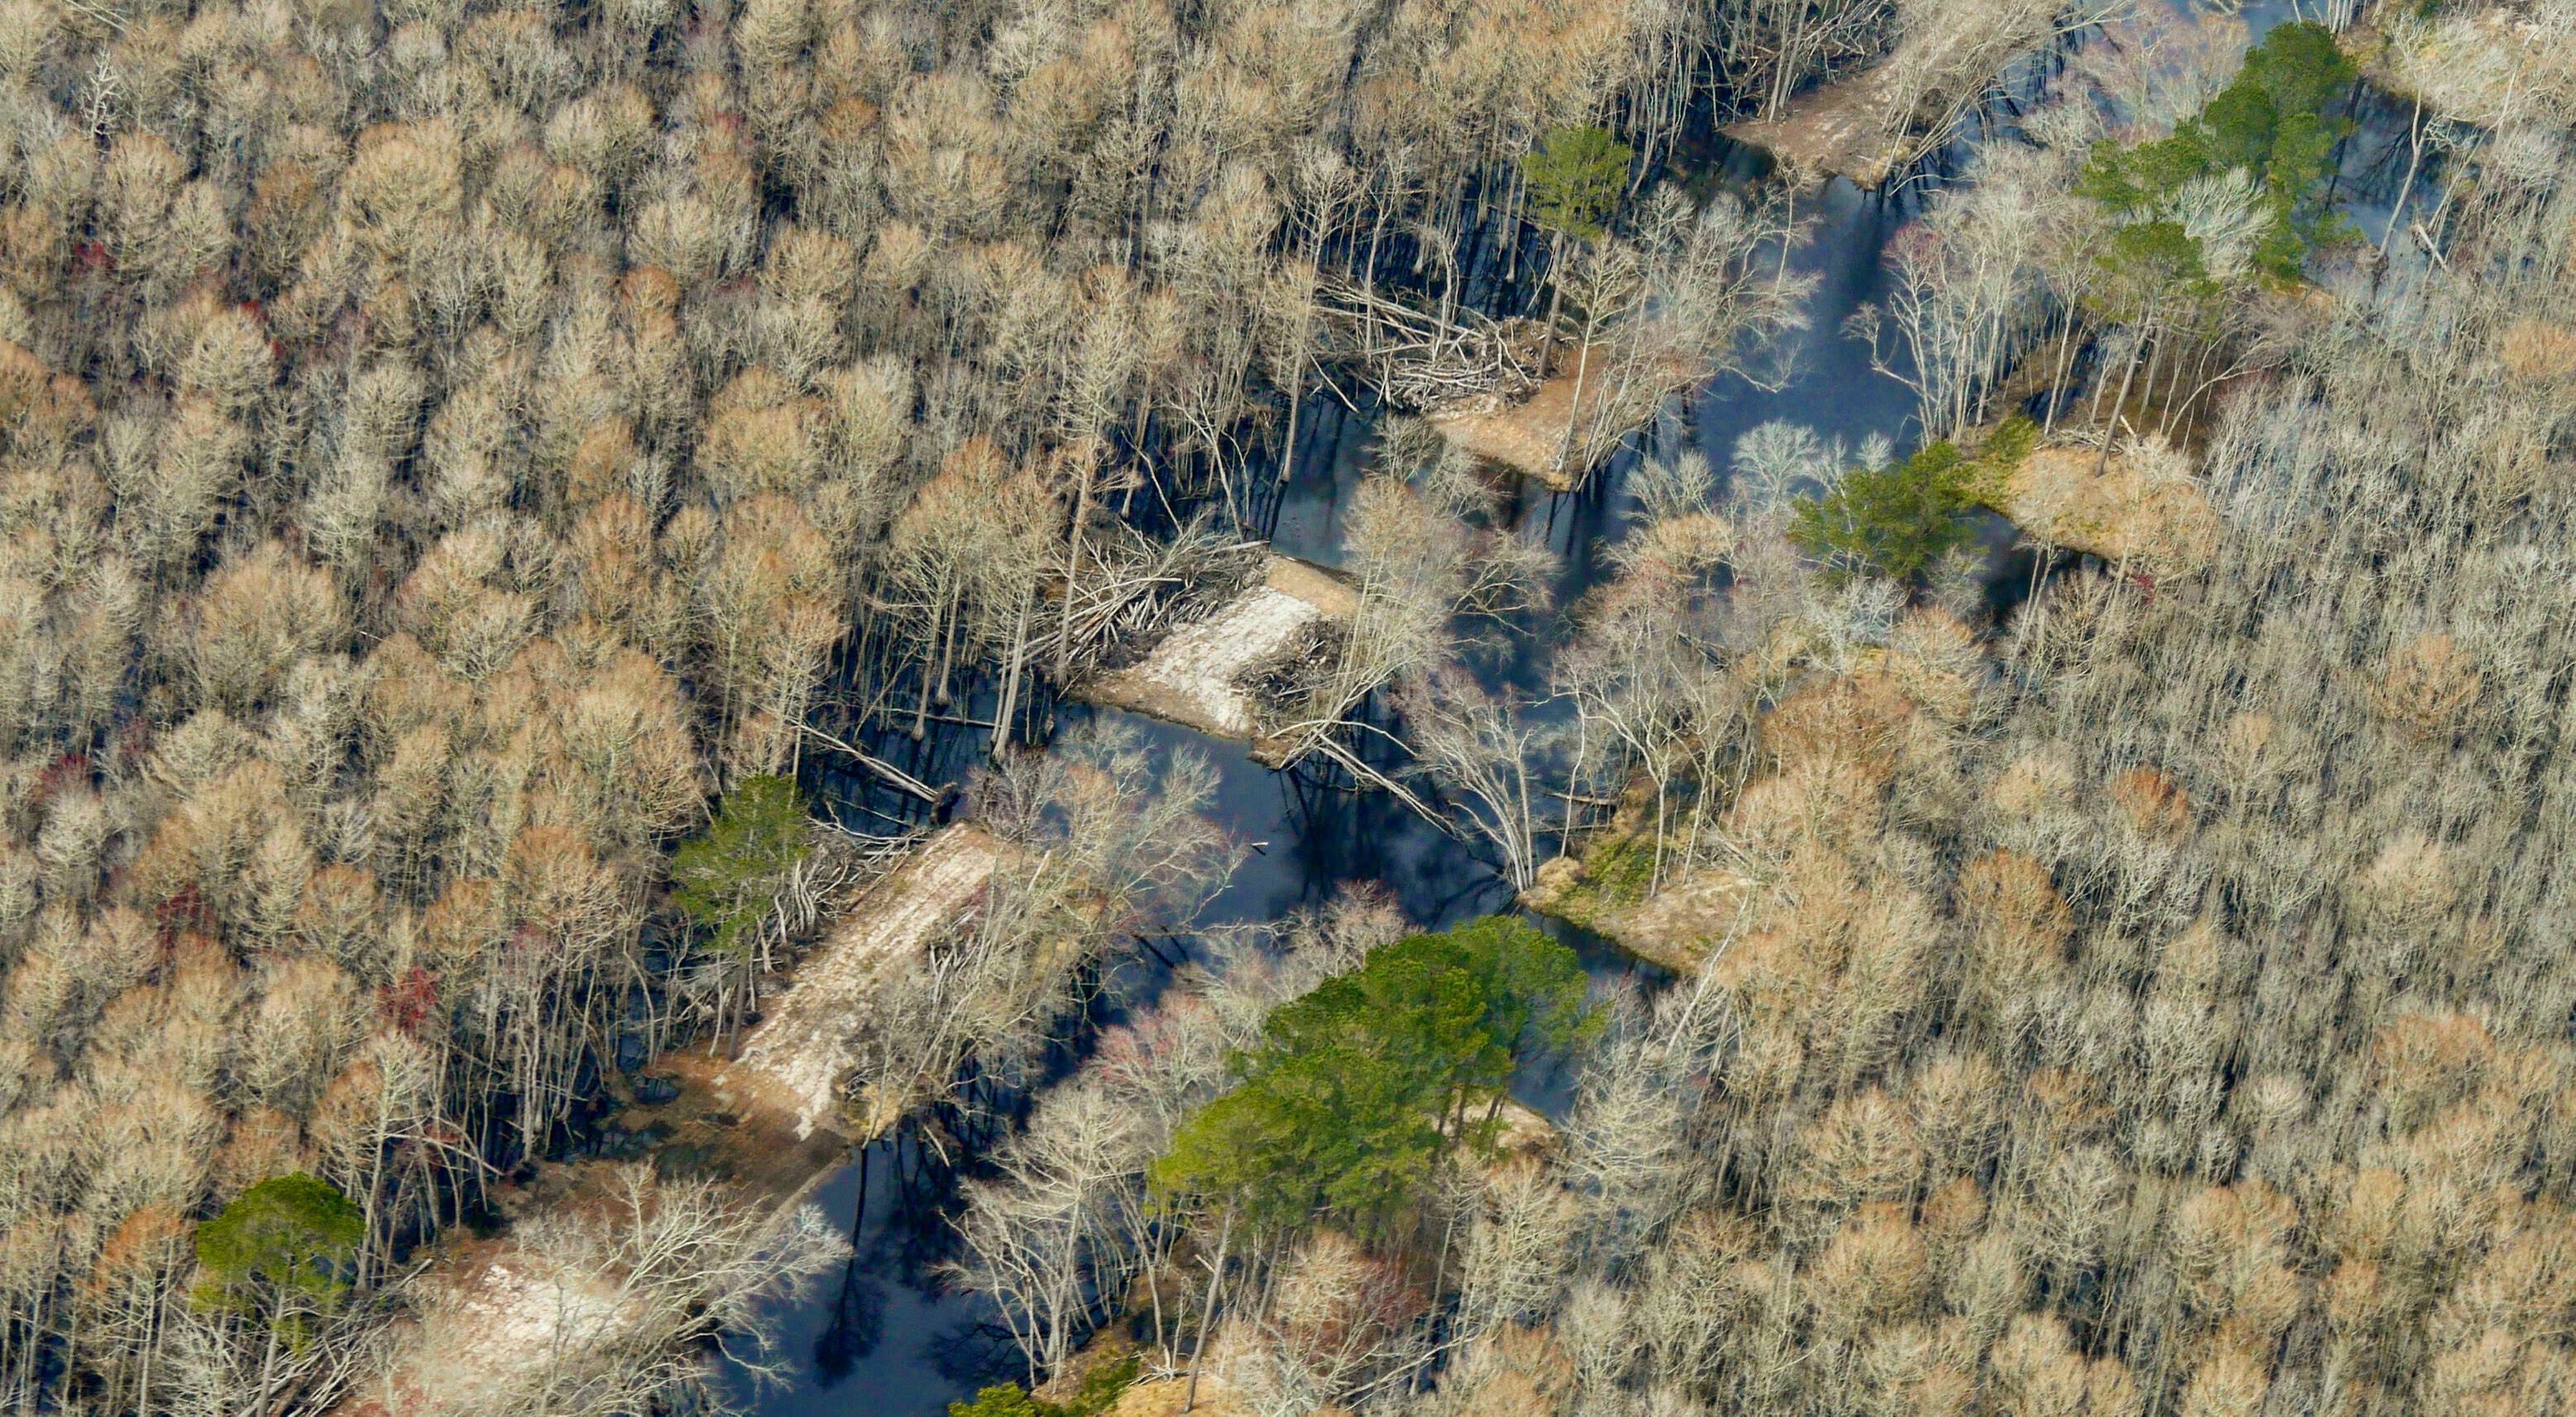 Aerial view of the Pocomoke River. The narrow river channel is bisected in two places by wide cuts in the earthen berms that hem the river in and hold it back from the surrounding forested floodplain.